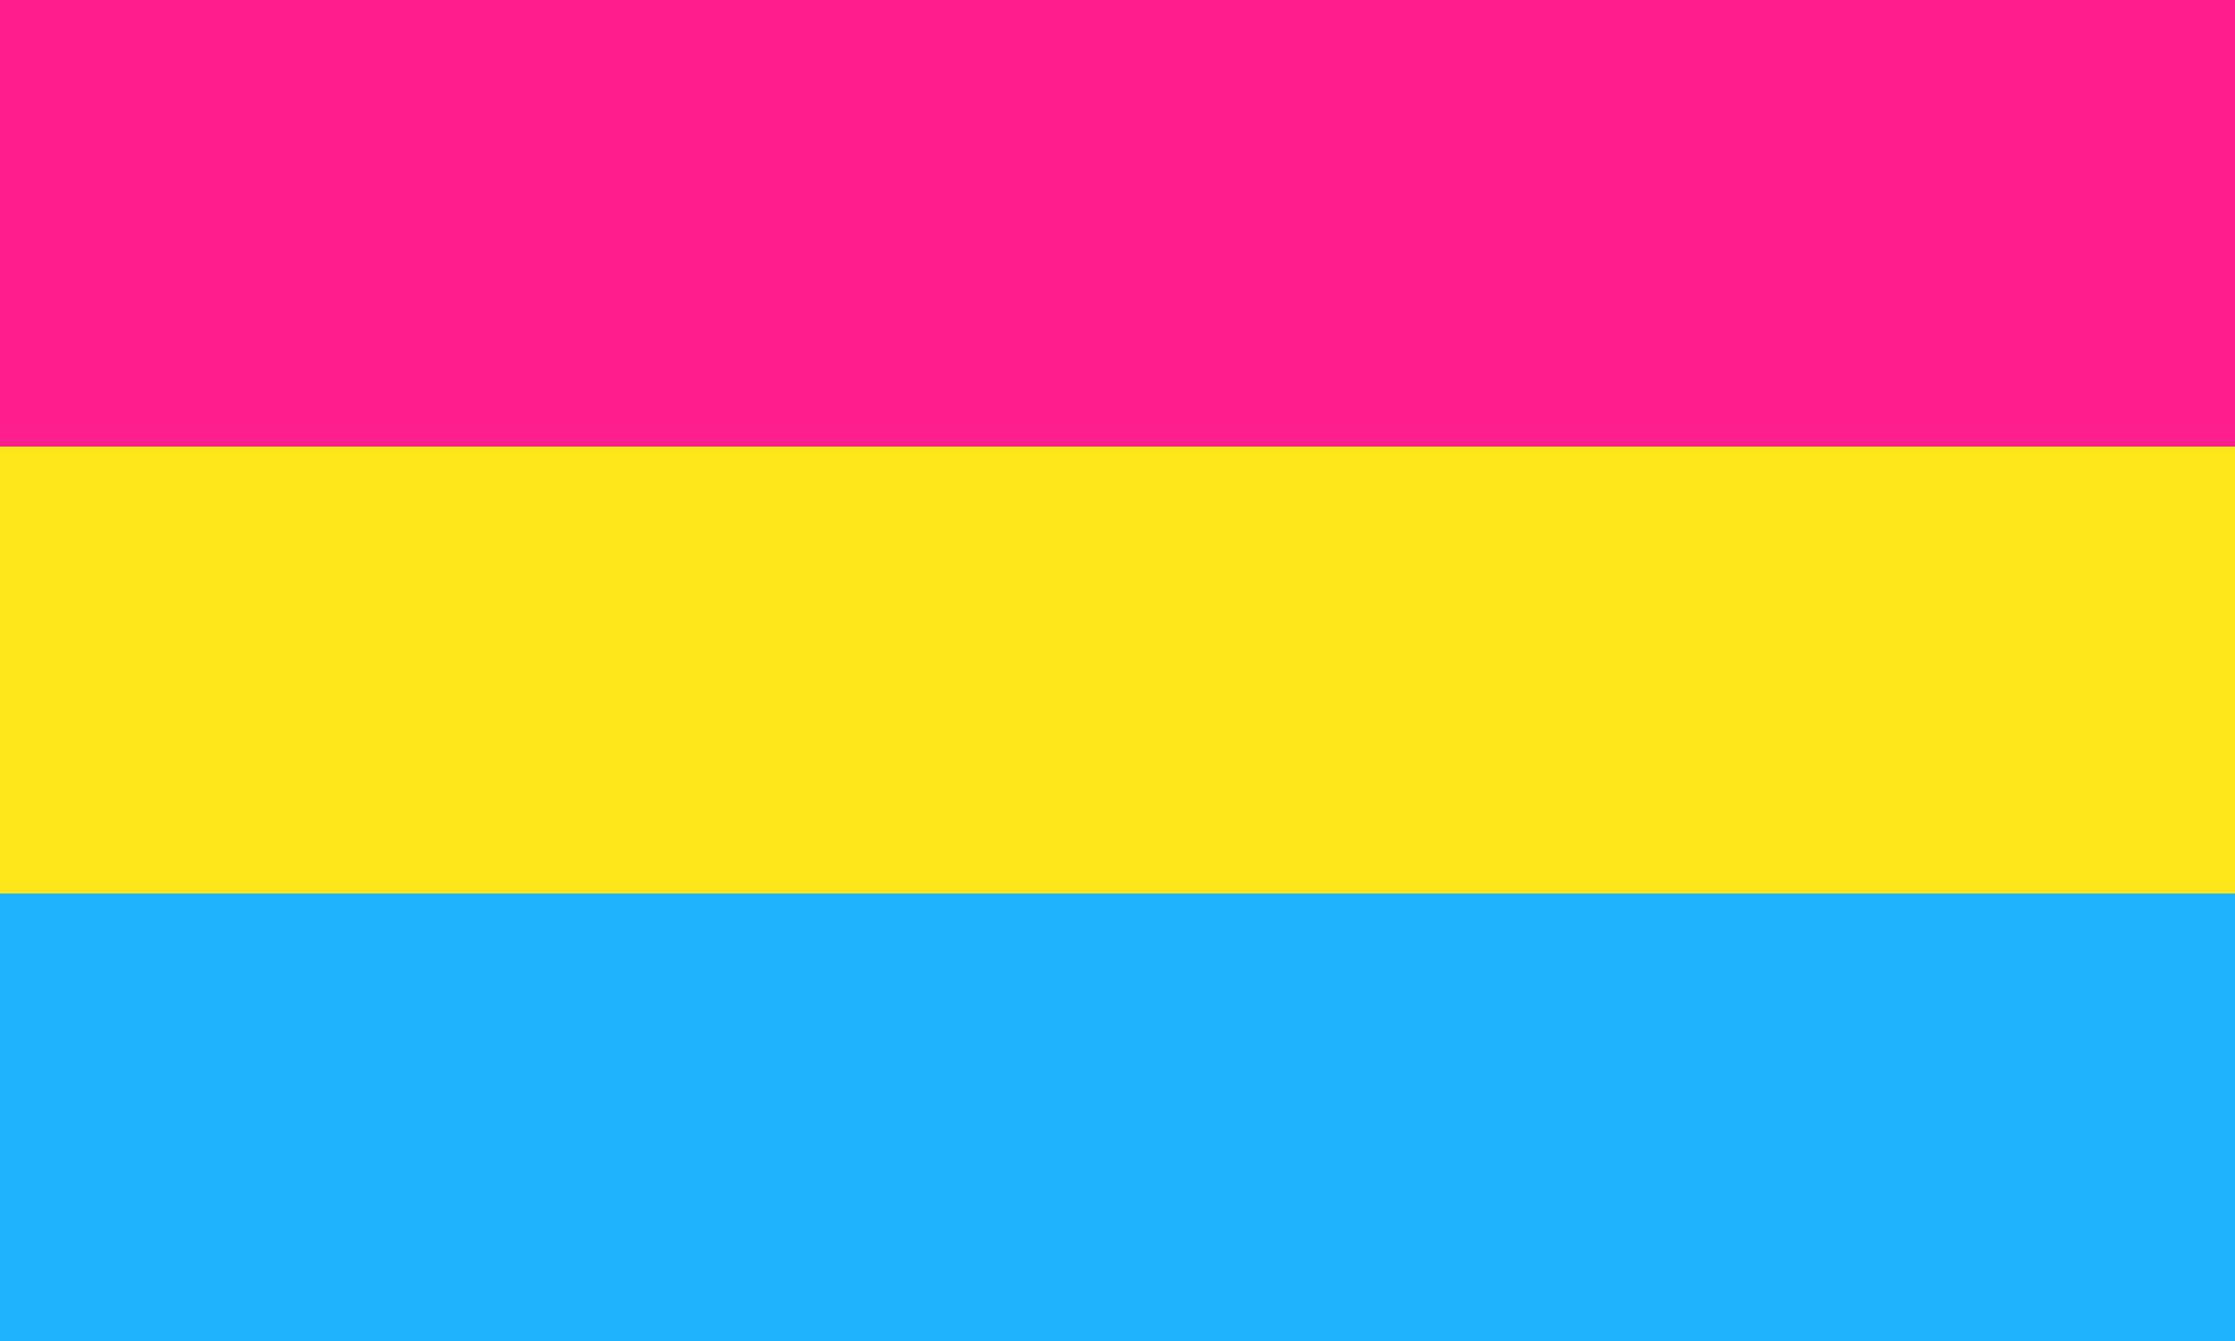 Pansexuality: Meaning, History, and Statistics